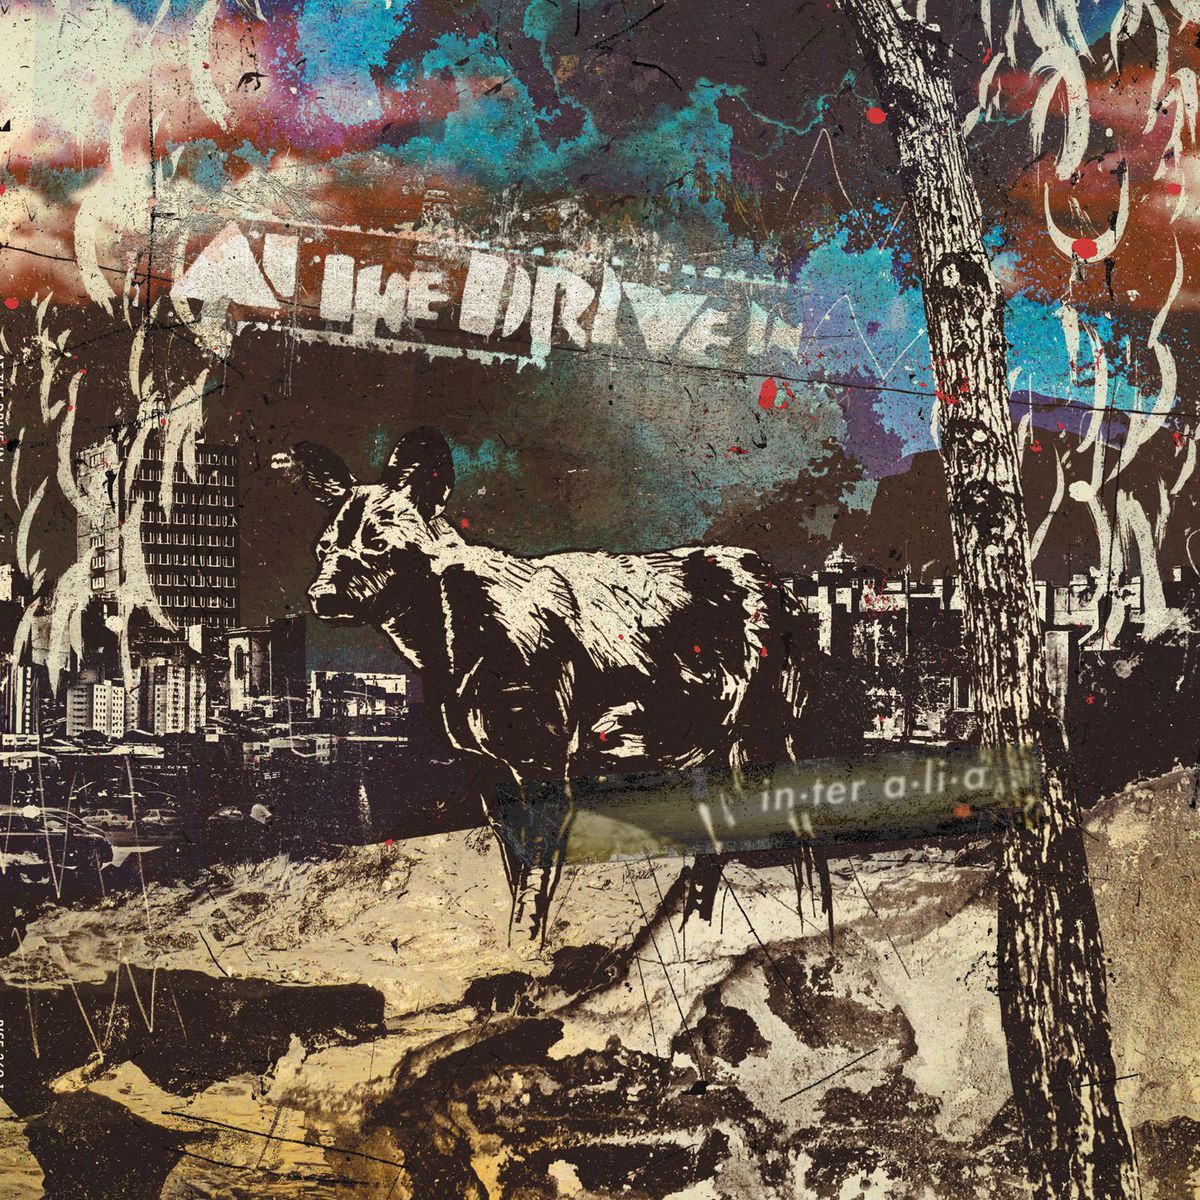 at the drive in At The Drive In release their first album in 17 years, in • ter a • li • a: Stream/Download